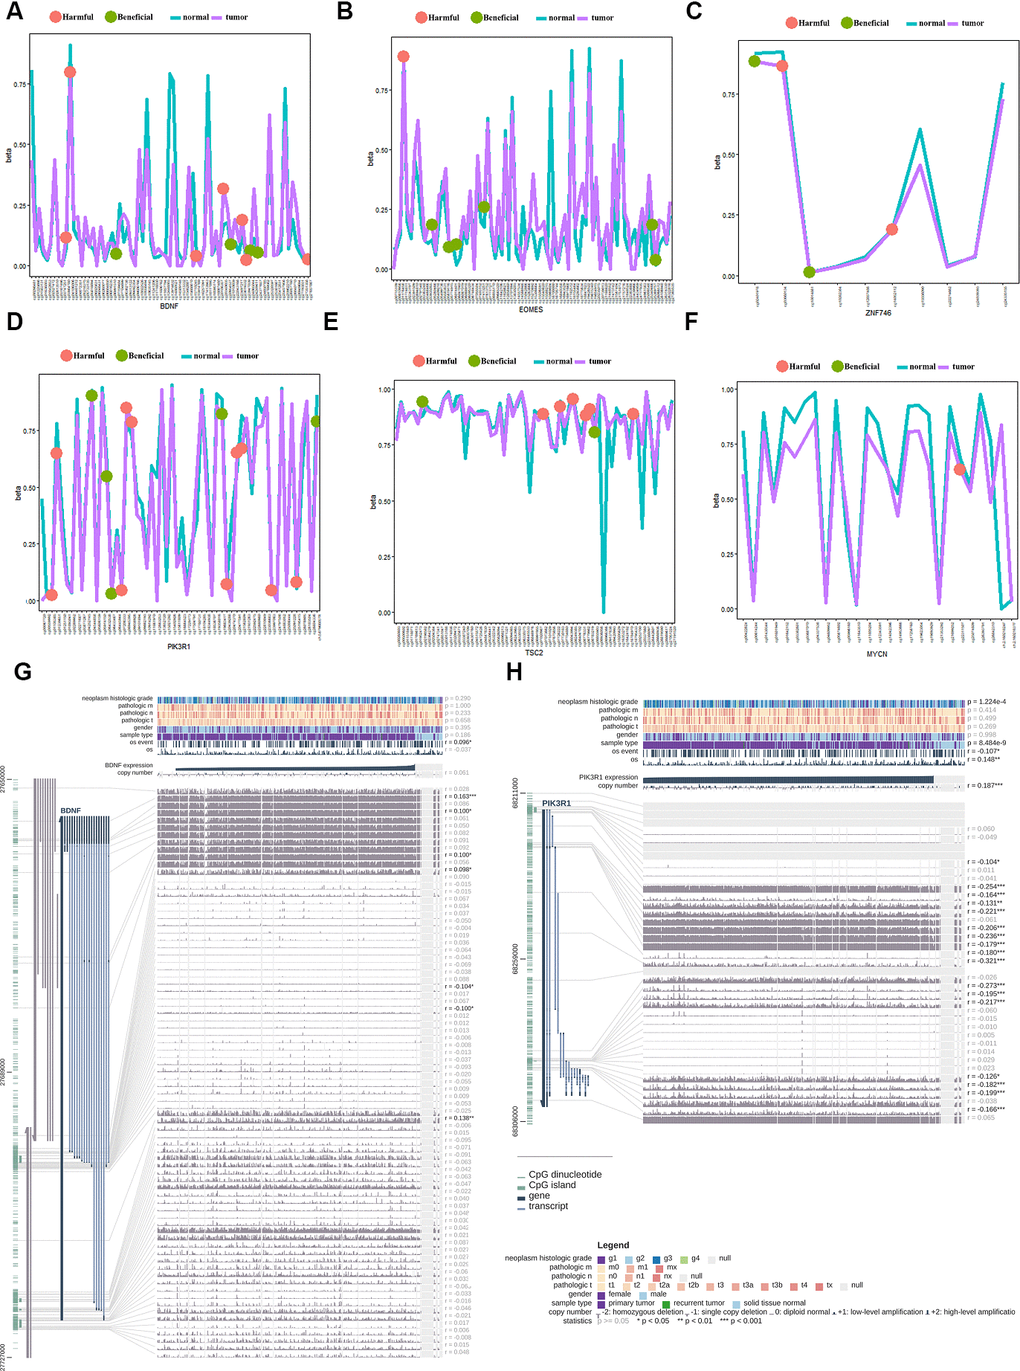 Gene methylation analysis of the gene signature between the tumor and normal tissues. (A) beneficial and harmful methylation sites in BDNF; (B) beneficial and harmful methylation sites in EOMES; (C) beneficial and harmful methylation sites in ZNF746 gene; (D) beneficial and harmful methylation sites in PIK3R1gene; (E) beneficial and harmful methylation sites in TSC2 gene; (F) beneficial and harmful methylation sites in MYCN gene; (G) The methylation of BDNF gene significantly correlated with the OS of HCC patients; (H) The methylation of PIK3R1 gene significantly correlated with the OS of HCC patients. HCC, hepatocellular carcinoma; OS, overall survival; ROC, receiver operating characteristic curve.